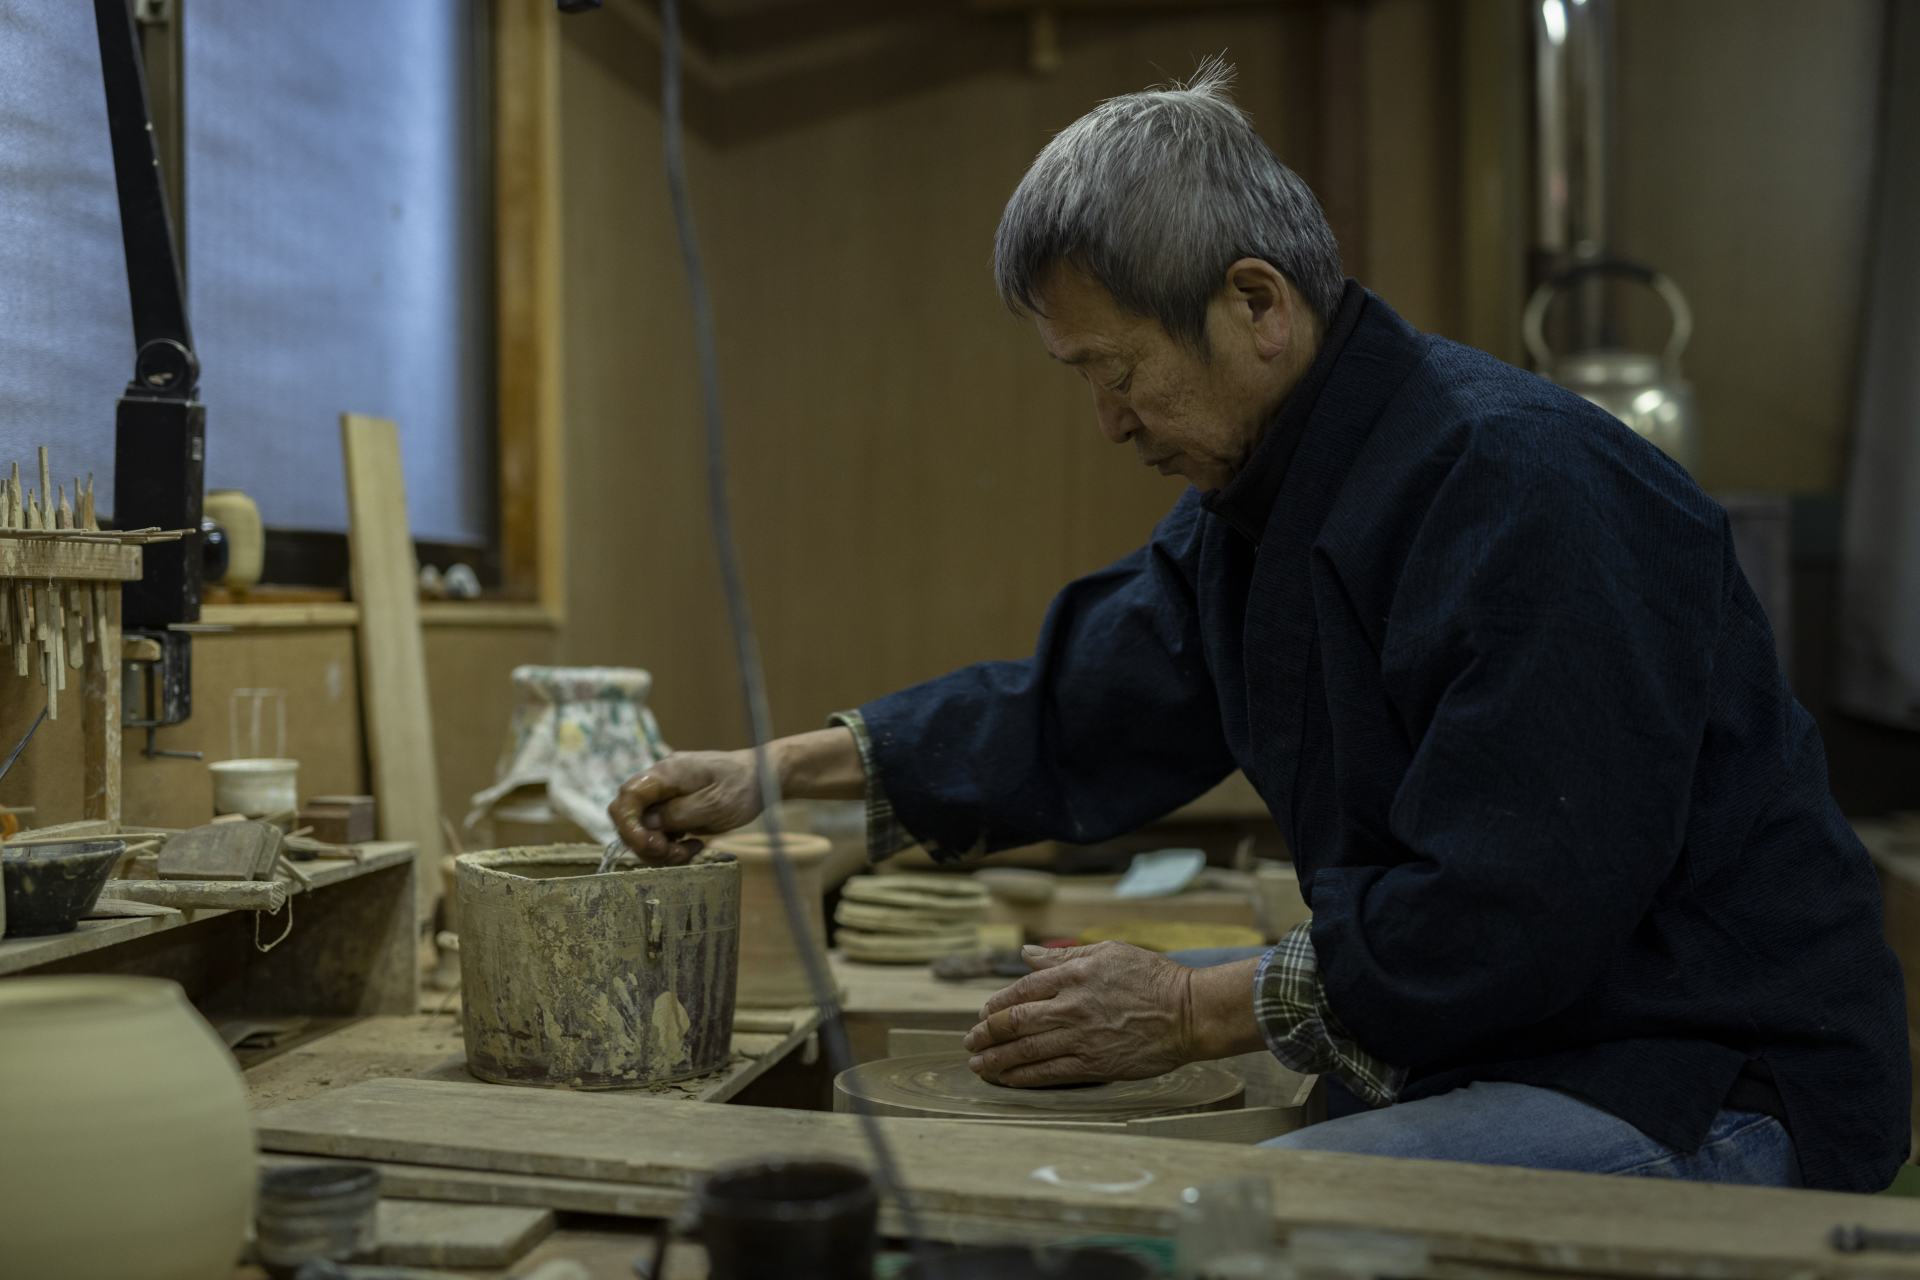 Great potter at work: these are the types of cultural traditions and treasures that should be sustained in Japan.    